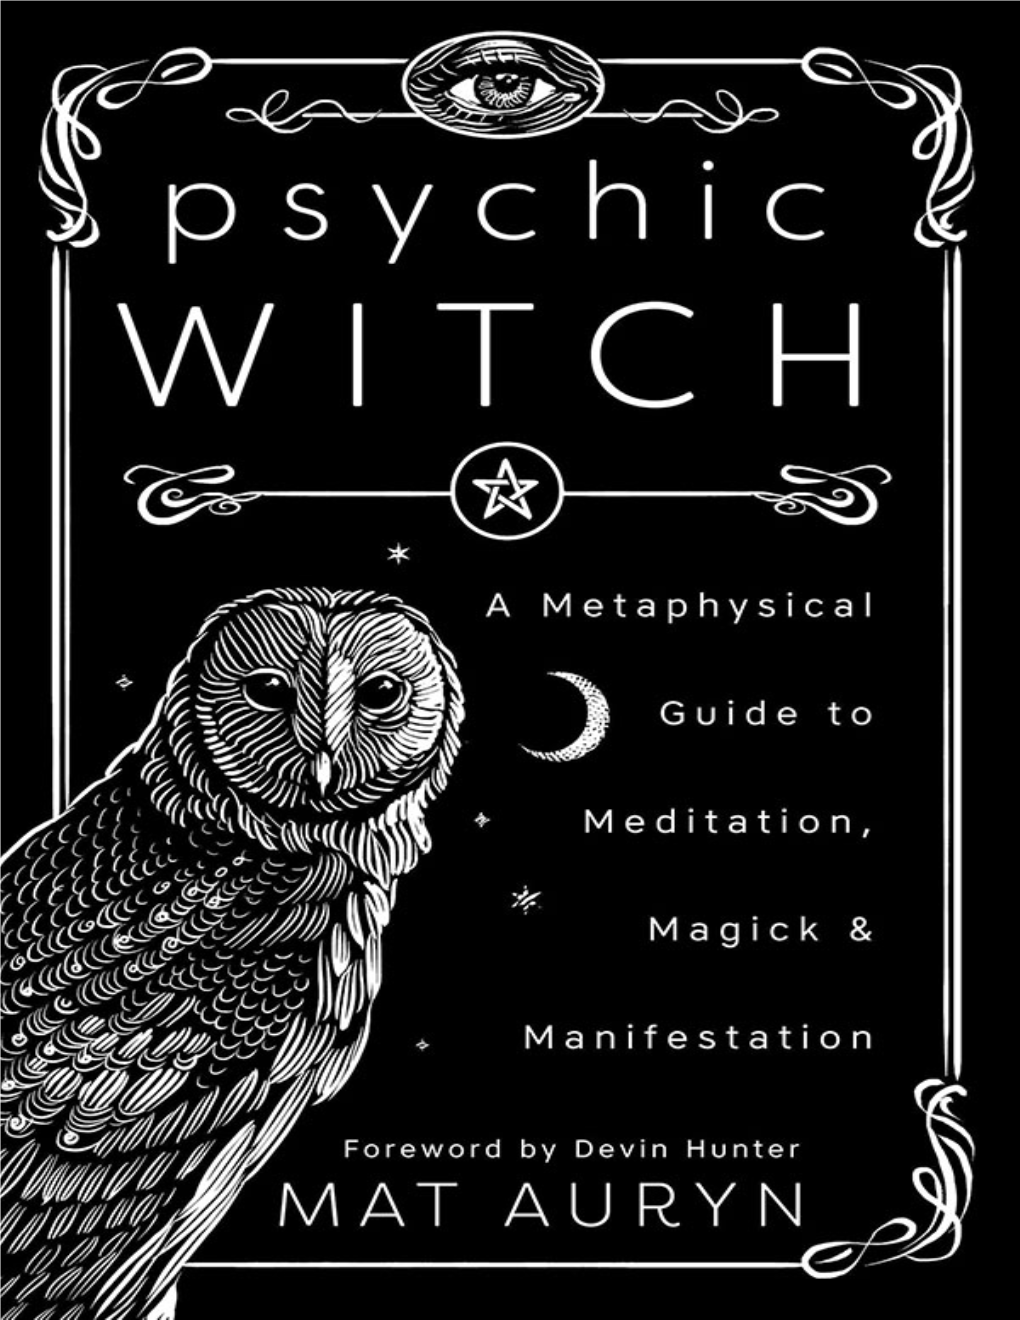 Psychic Witch: a Metaphysical Guide to Meditation, Magick & Manifestation © 2020 by Mat Auryn